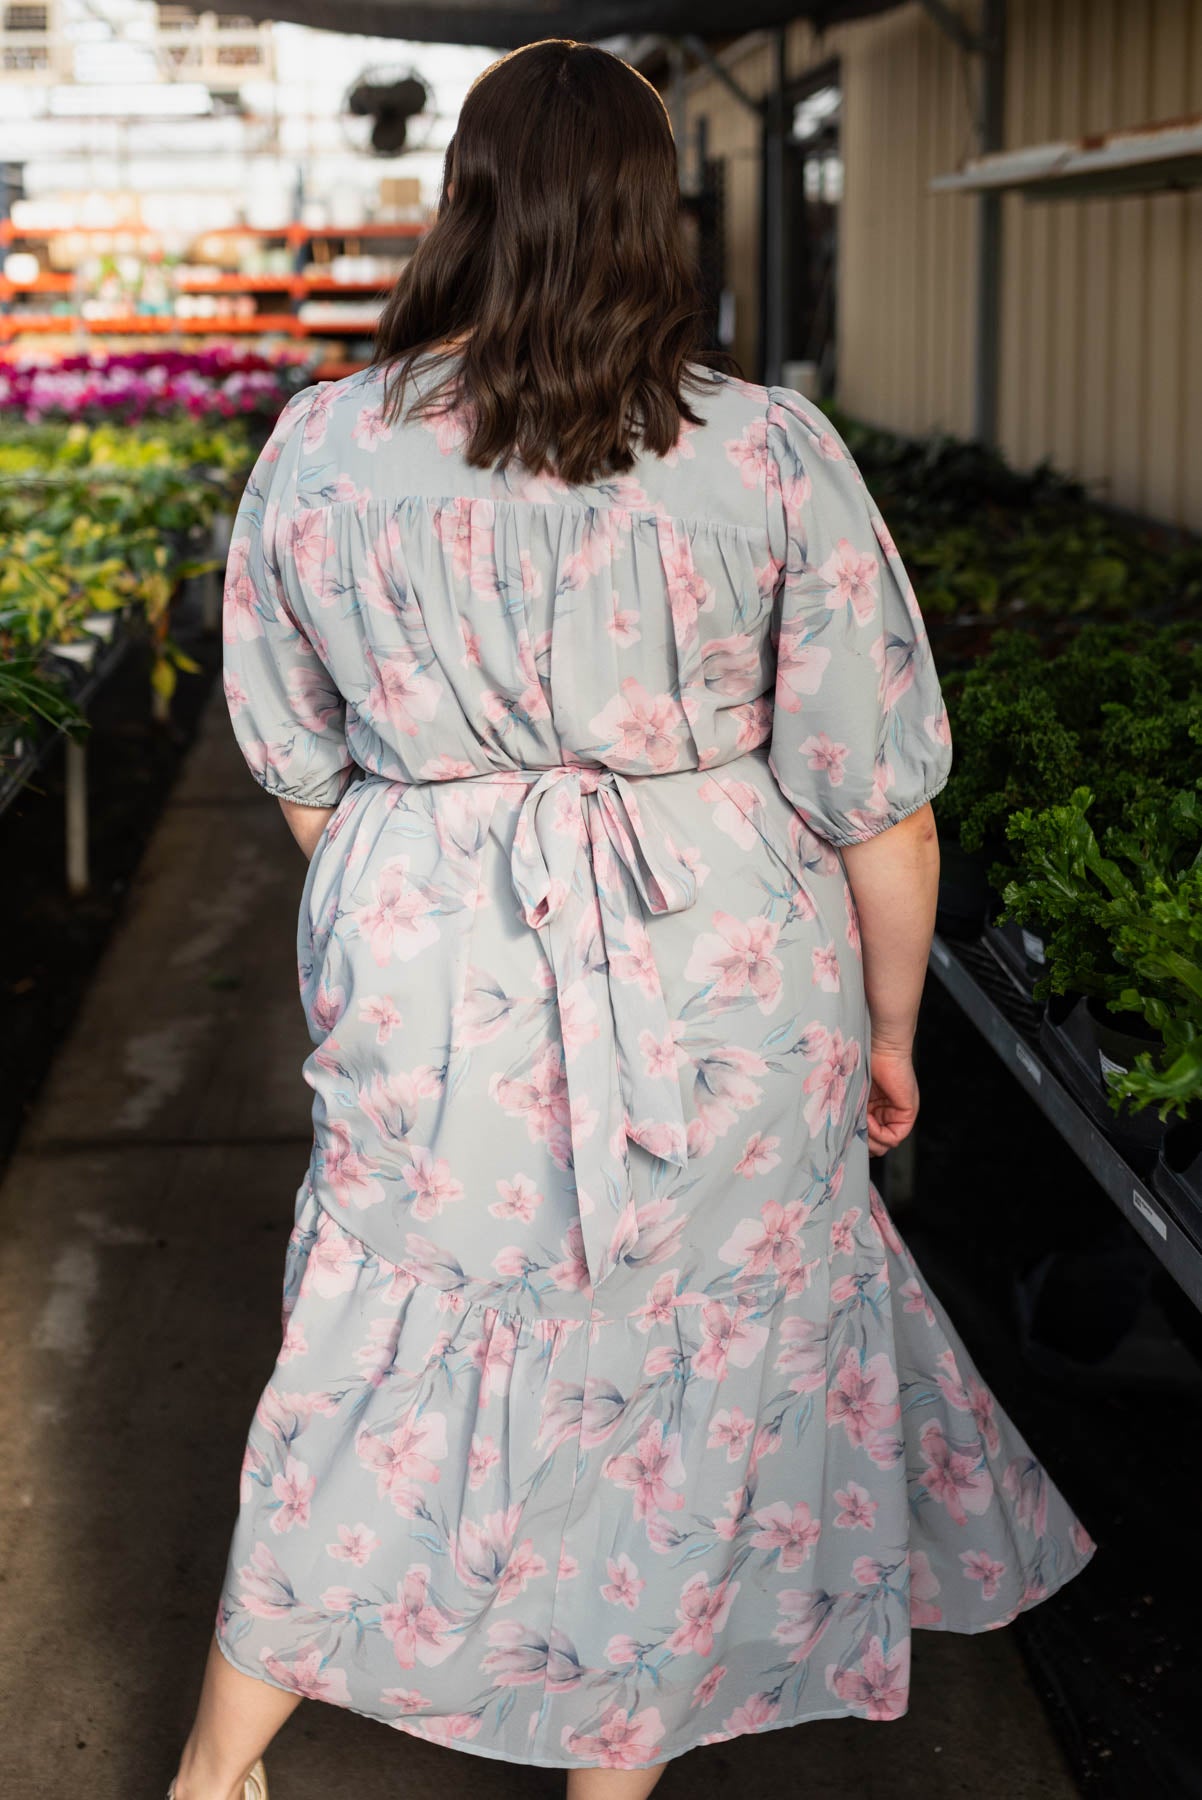 Back view of the plus size sage grey watercolor floral dress that ties in the back